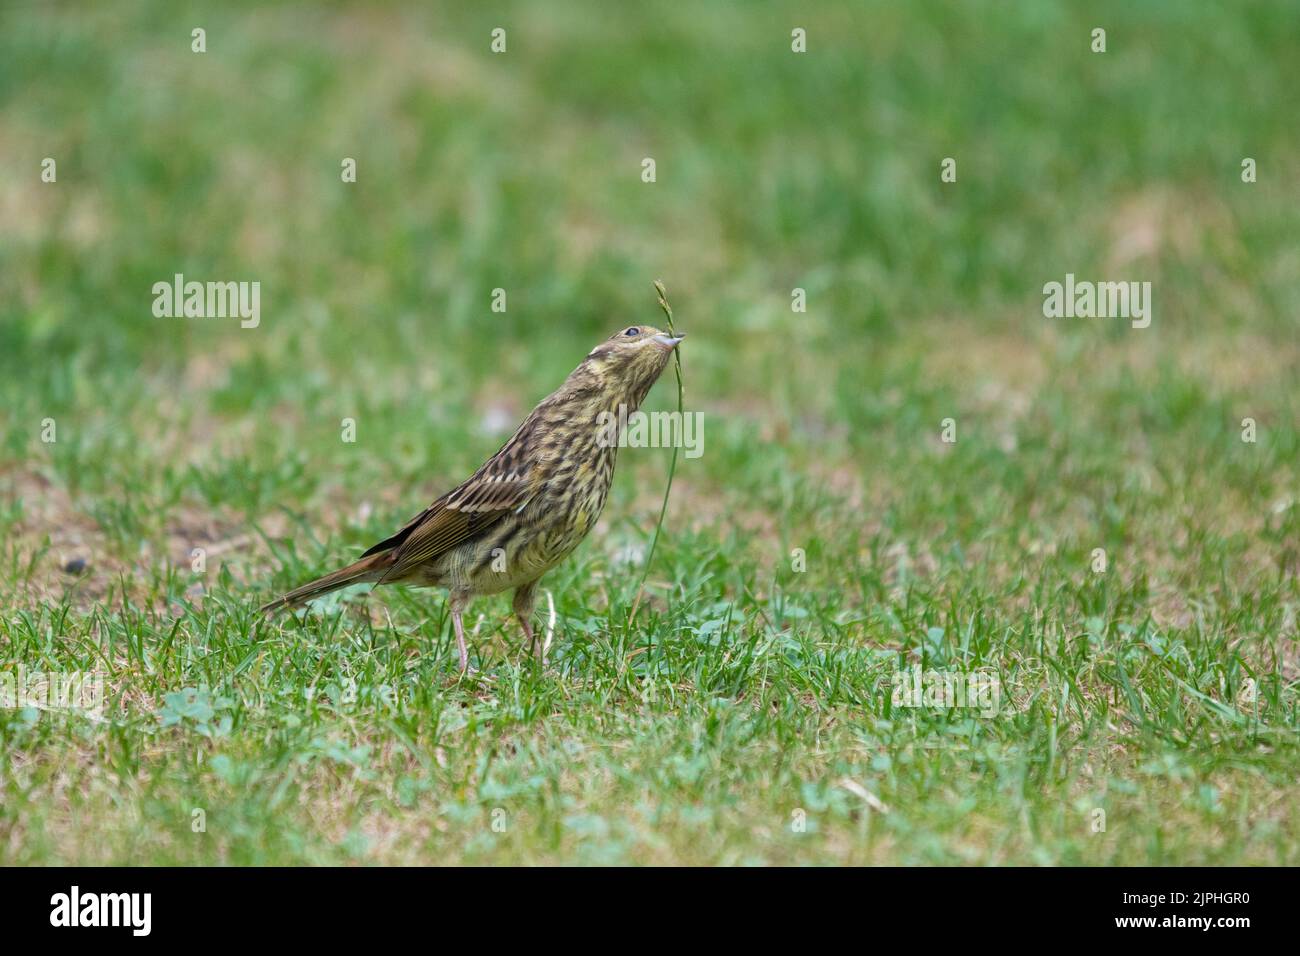 Close up of corn bunting, Emberiza calandra, also known by its synonym Miliaria calandra feeding on the seeds on a ripe grass blade Stock Photo